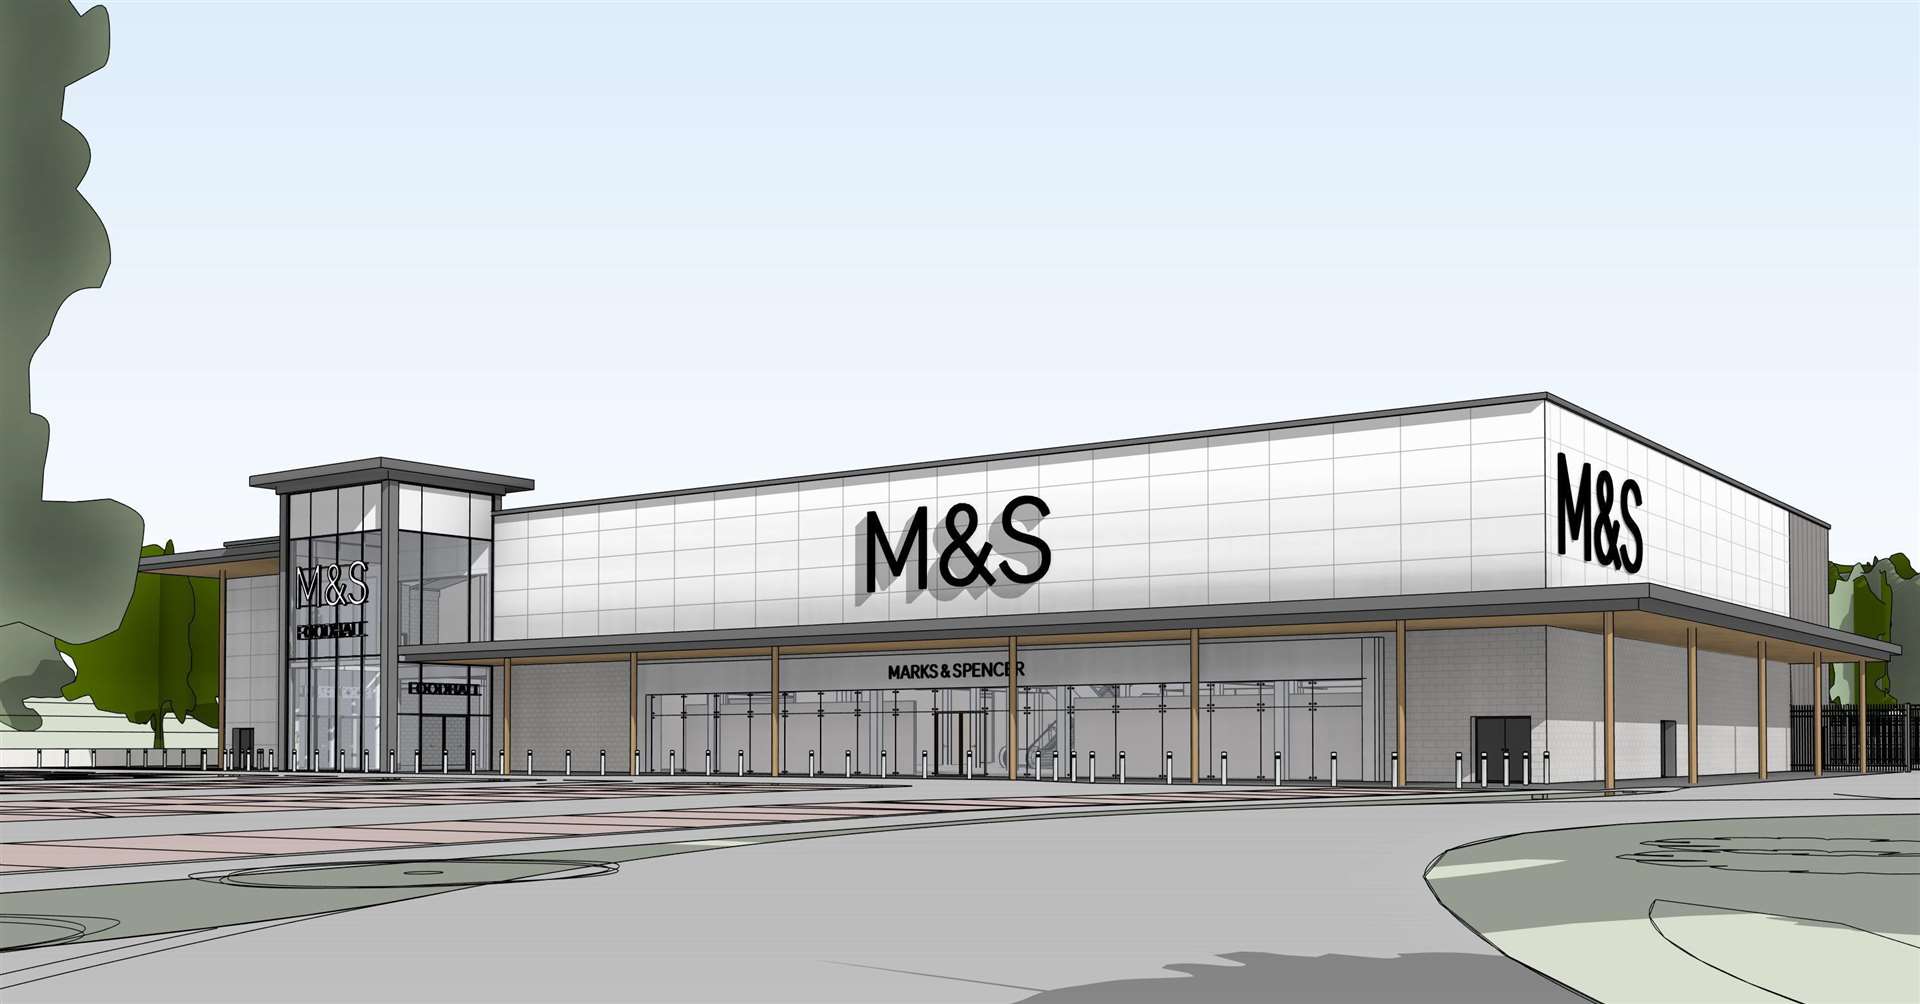 The proposed new Marks and Spencer store at Eclipse Park, Maidstone